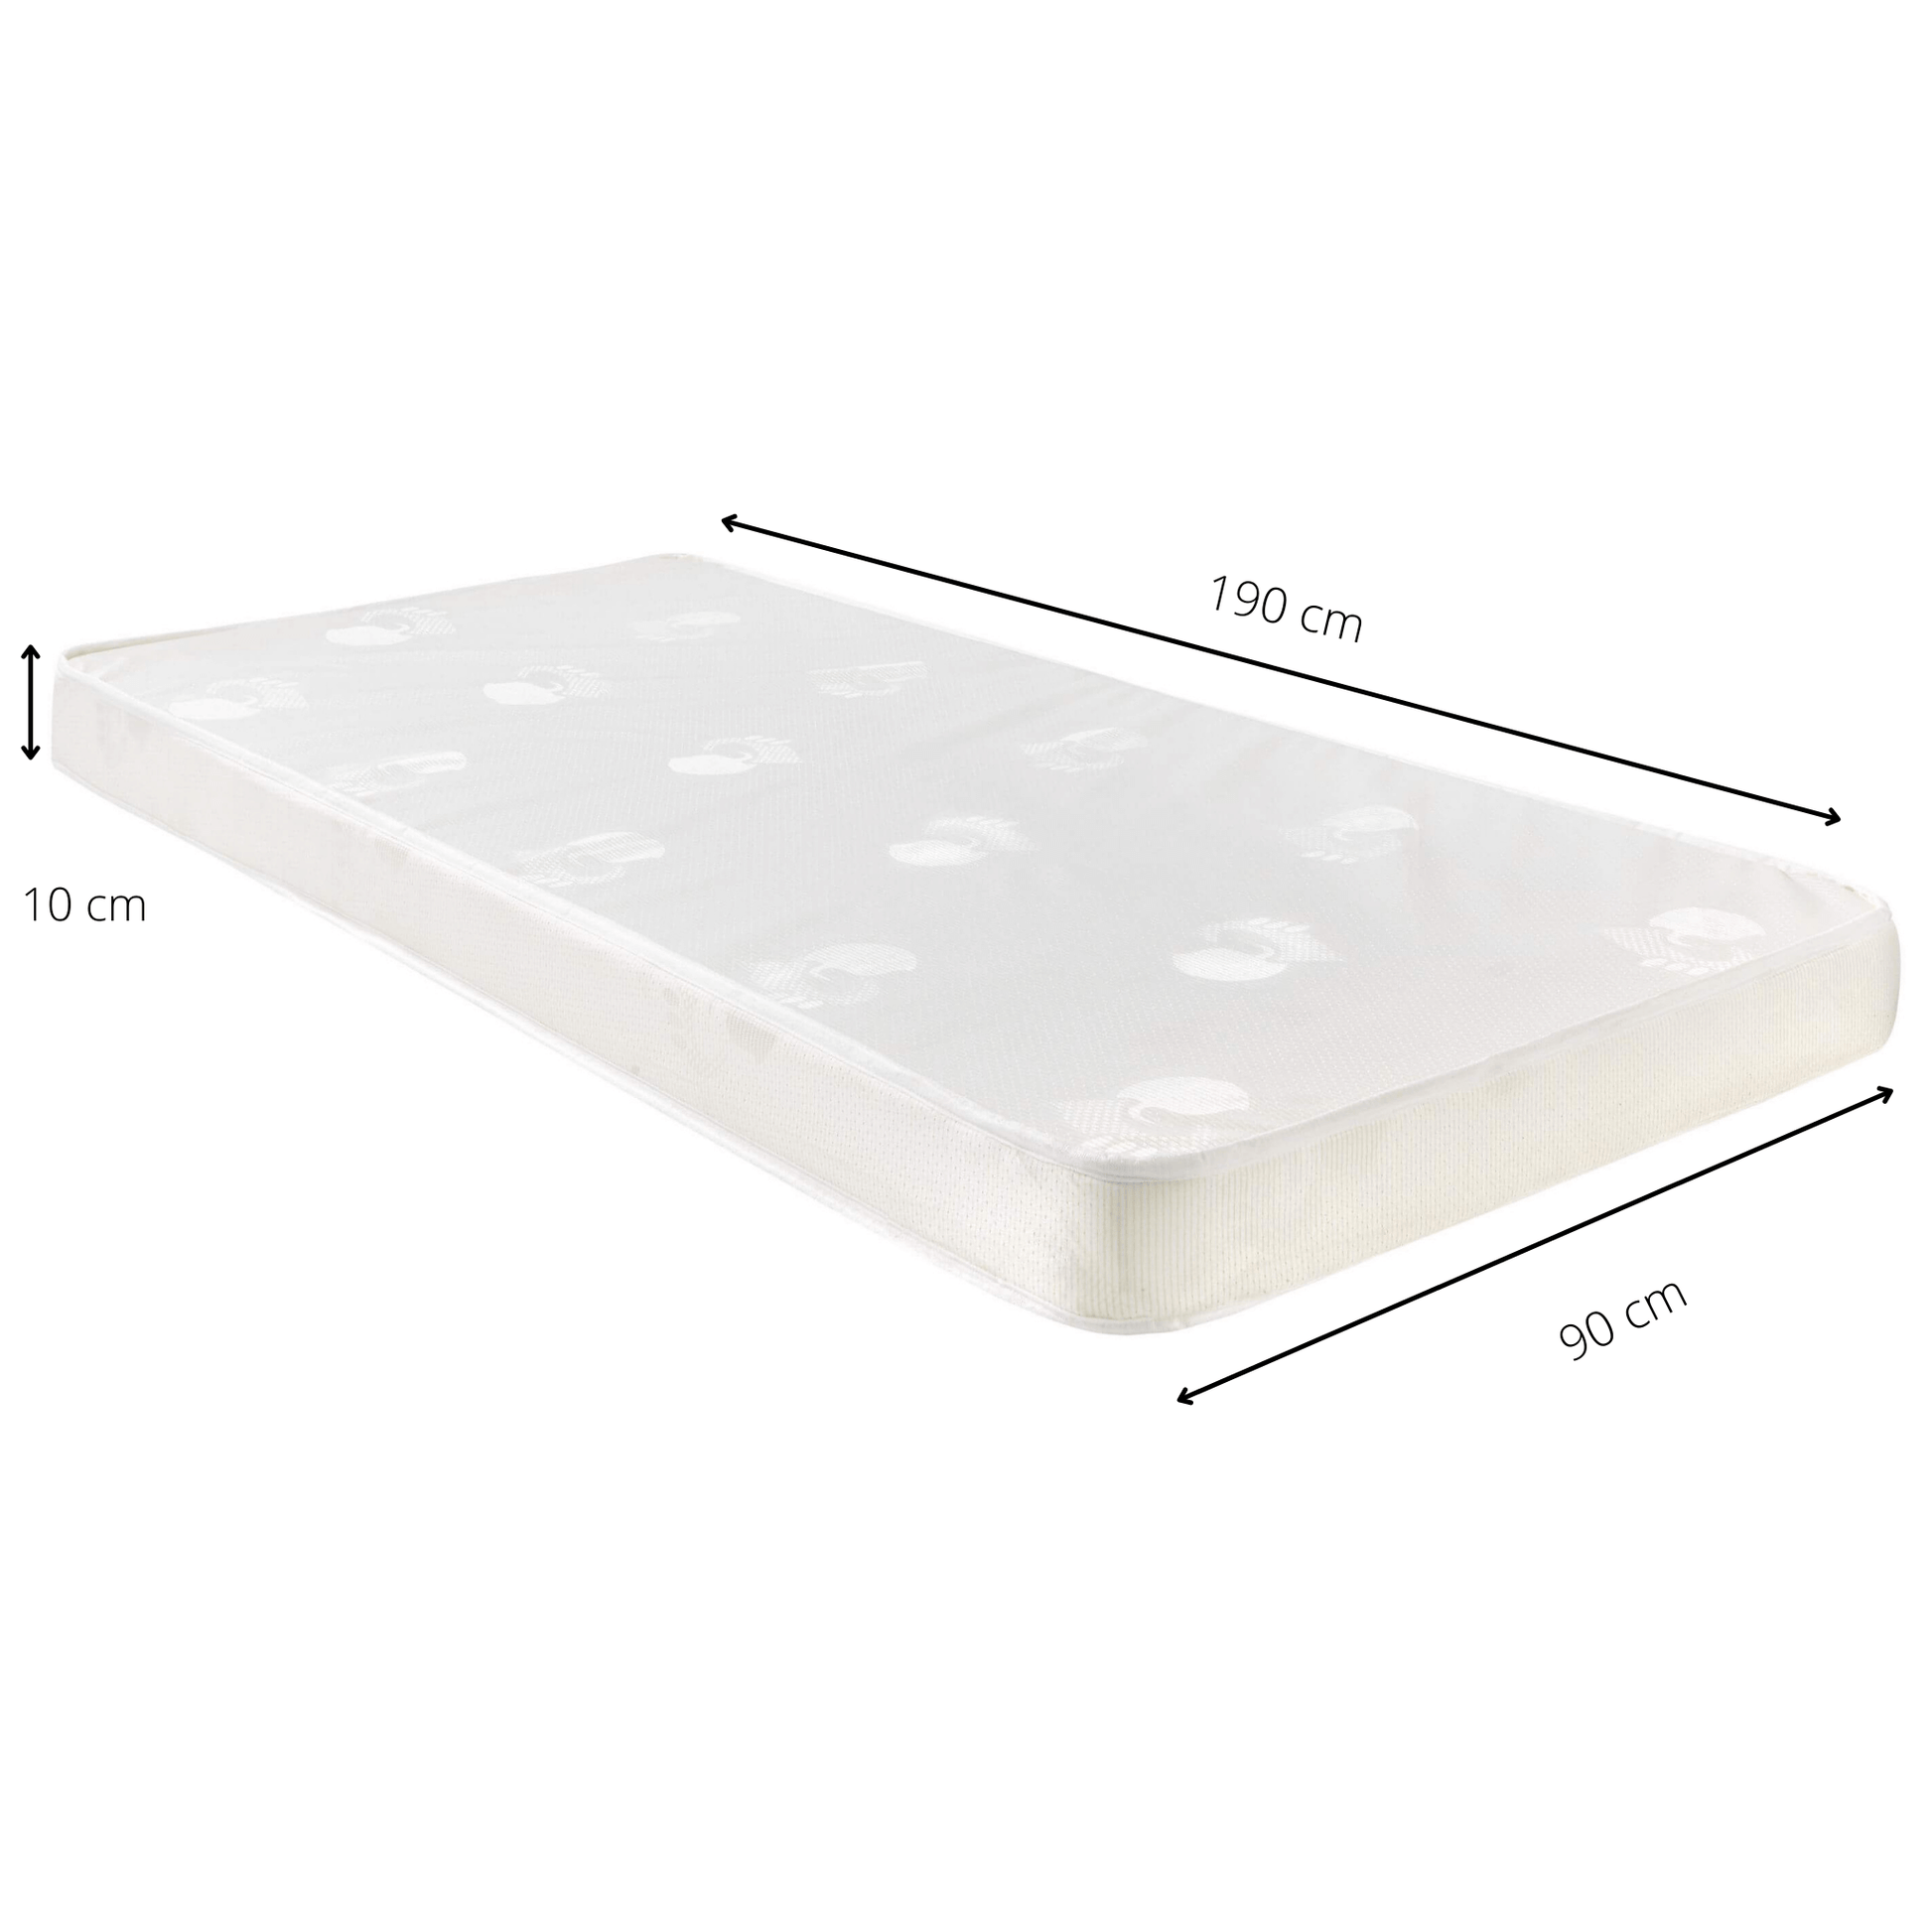 sleeptight trundle mattress with dimensions